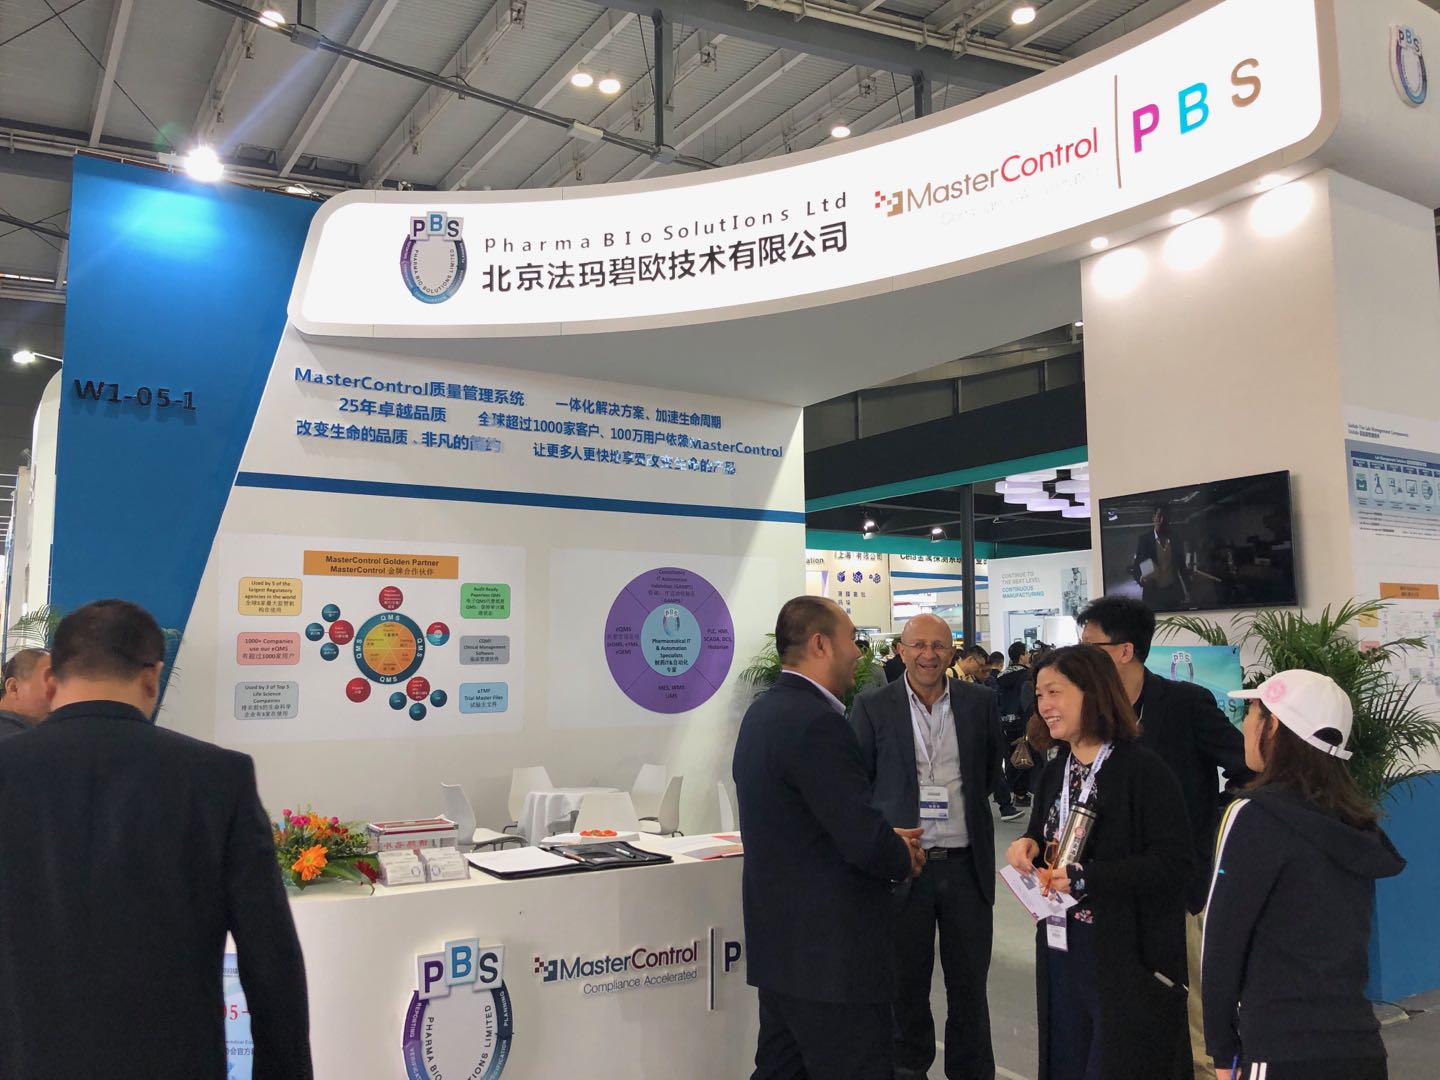 PBS participates in 2019 (Spring) China International Pharmaceutical Machinery Exhibition